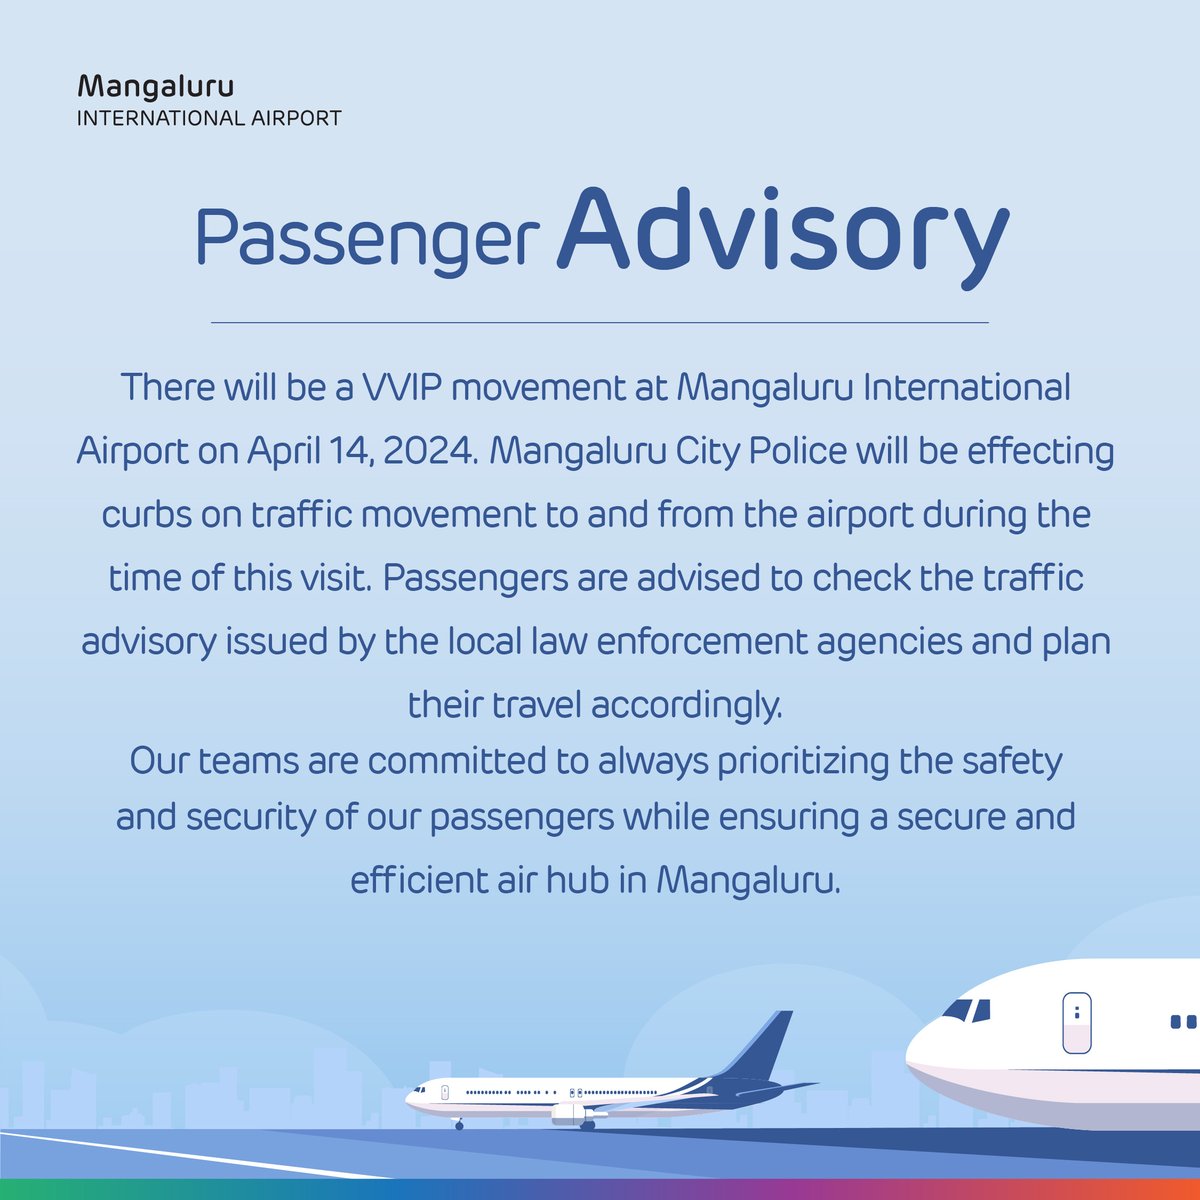 Due to the important VVIP visit, the Mangaluru City Police will be diverting traffic on April 14. We urge all our passengers to allocate additional time to reach the airport. #PassengerFirst #MangaluruAirport #PassengerAdvisory